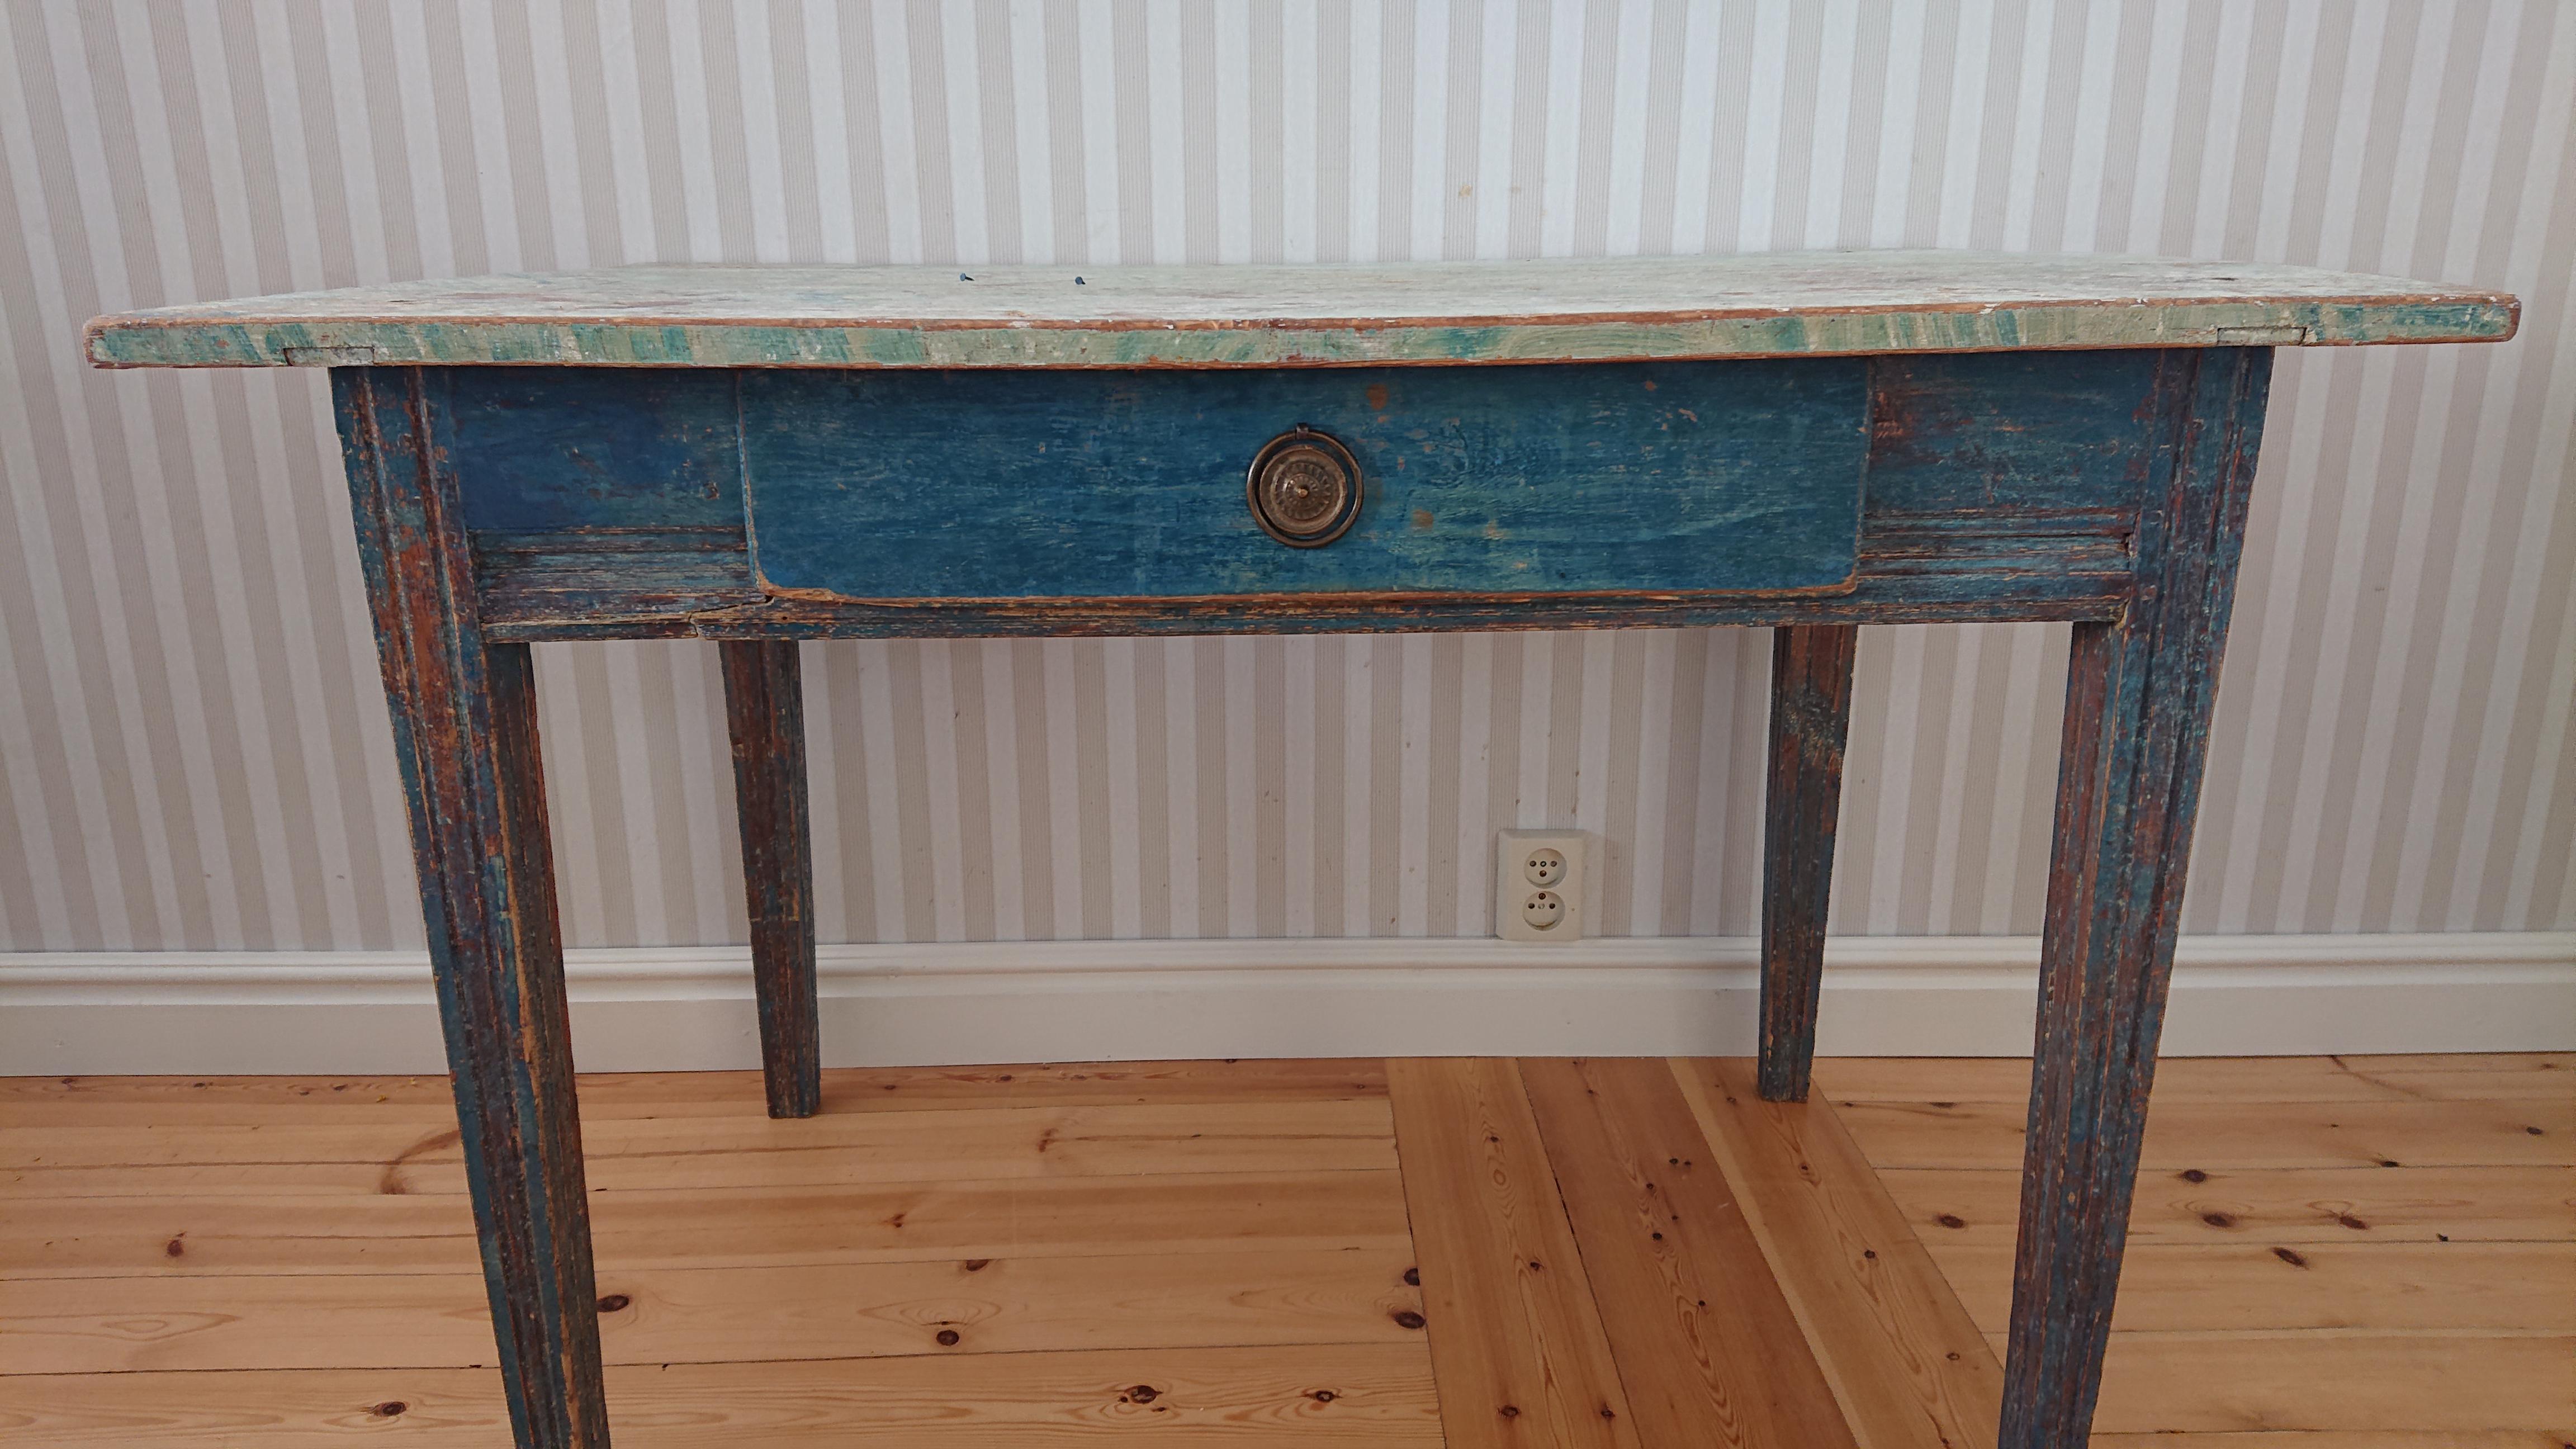 19th century Swedish Gustavian desk from Umeå Västerbotten, Northern Sweden.
Nice Gustavian Desk scraped to its original paint.
The table has a lovely blue color.
Reeded legs.
Marble paint on the top.
Hardware original to the piece.
Stable in